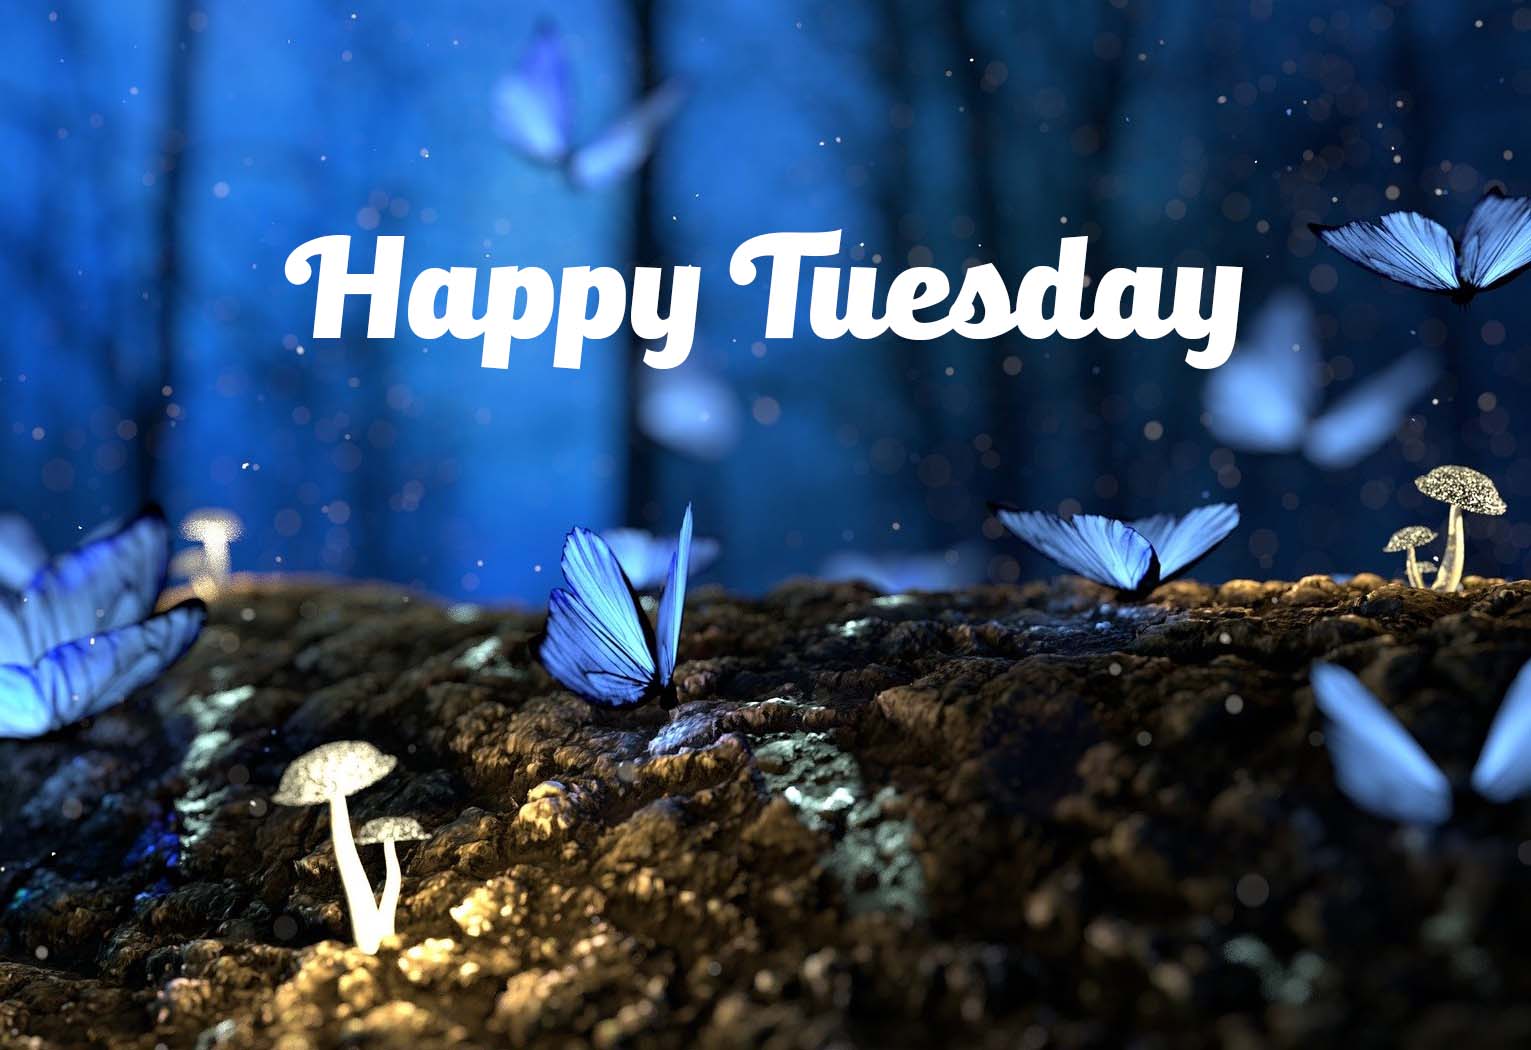 Happy Tuesday 2022 Images